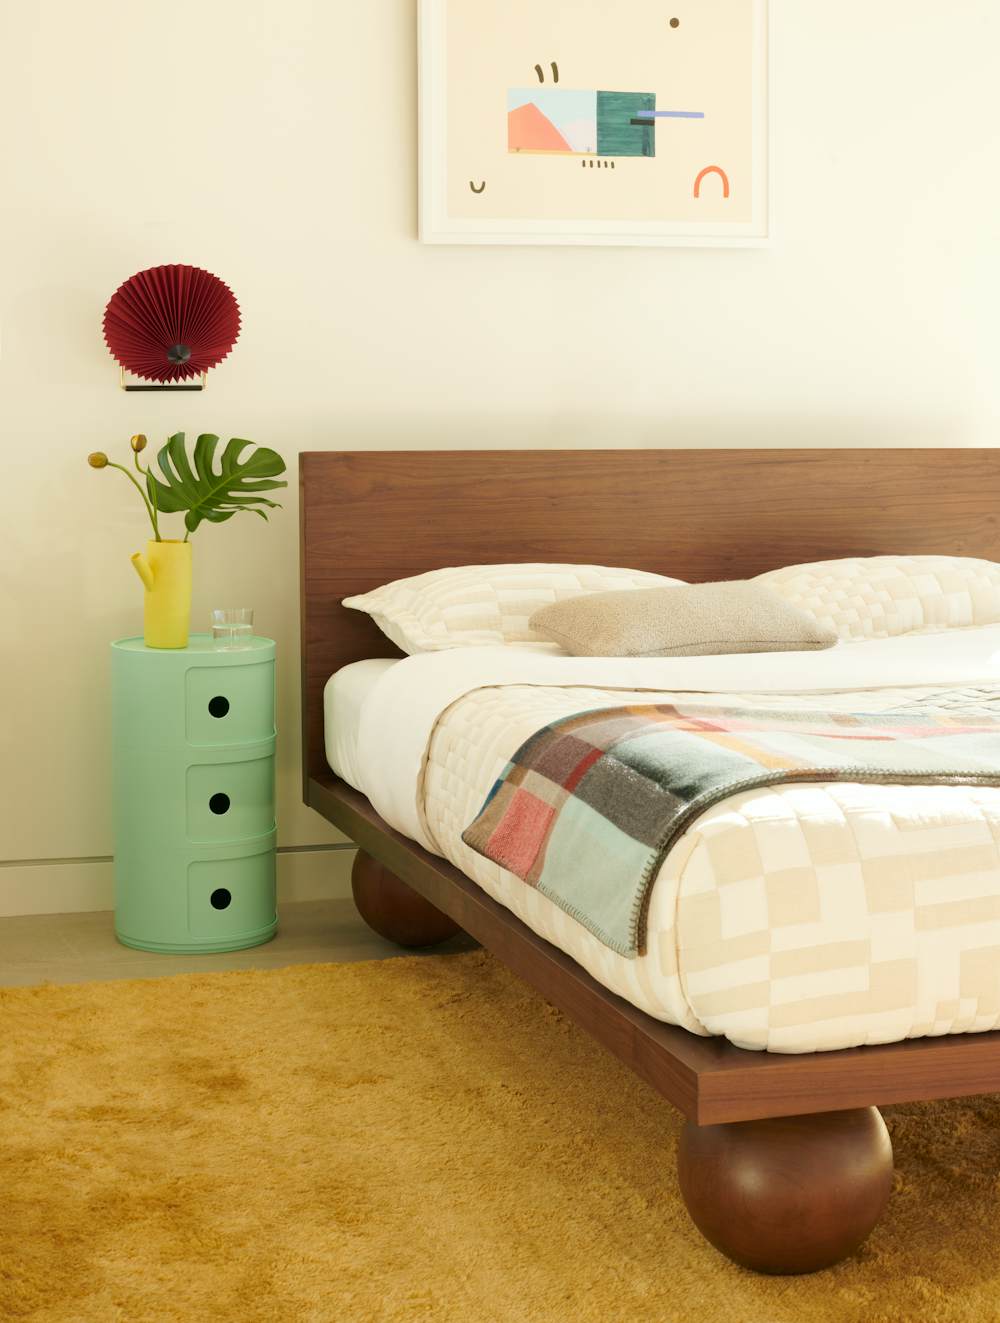 Yoko Bed, Matin Wall Sconce,  and Componibili Bio Storage Unit in a bedroom setting